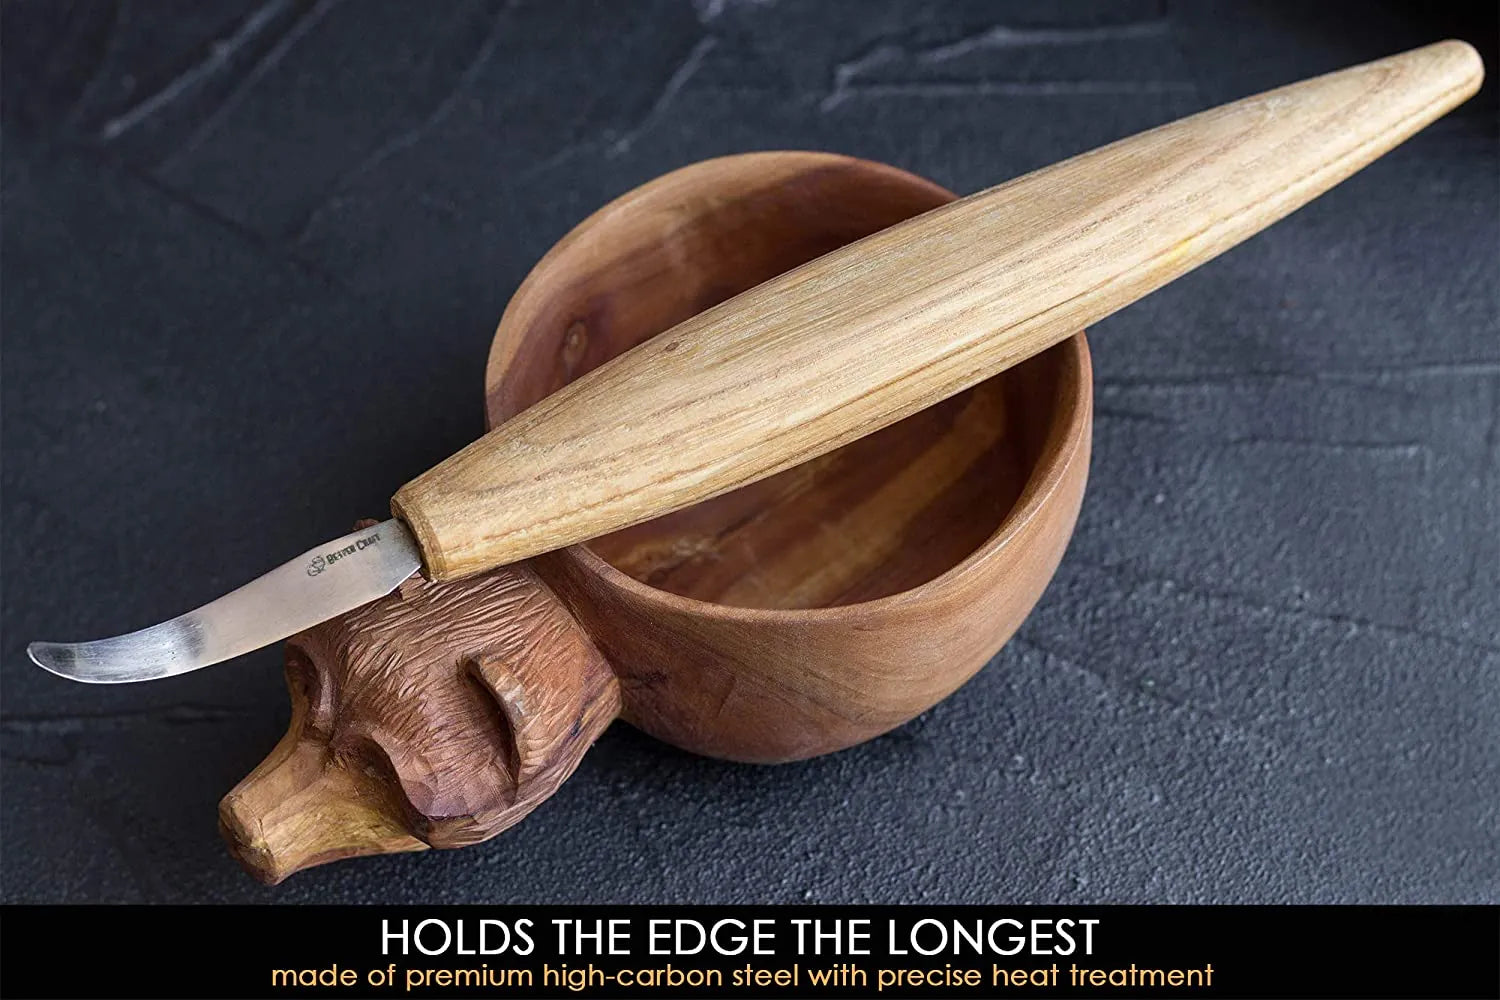 Spoon carving knife, Right-handed, Tight curve longer handle, Whittling  knife, Fresh wood carving, Handforged, Handcarving - The Spoon Crank